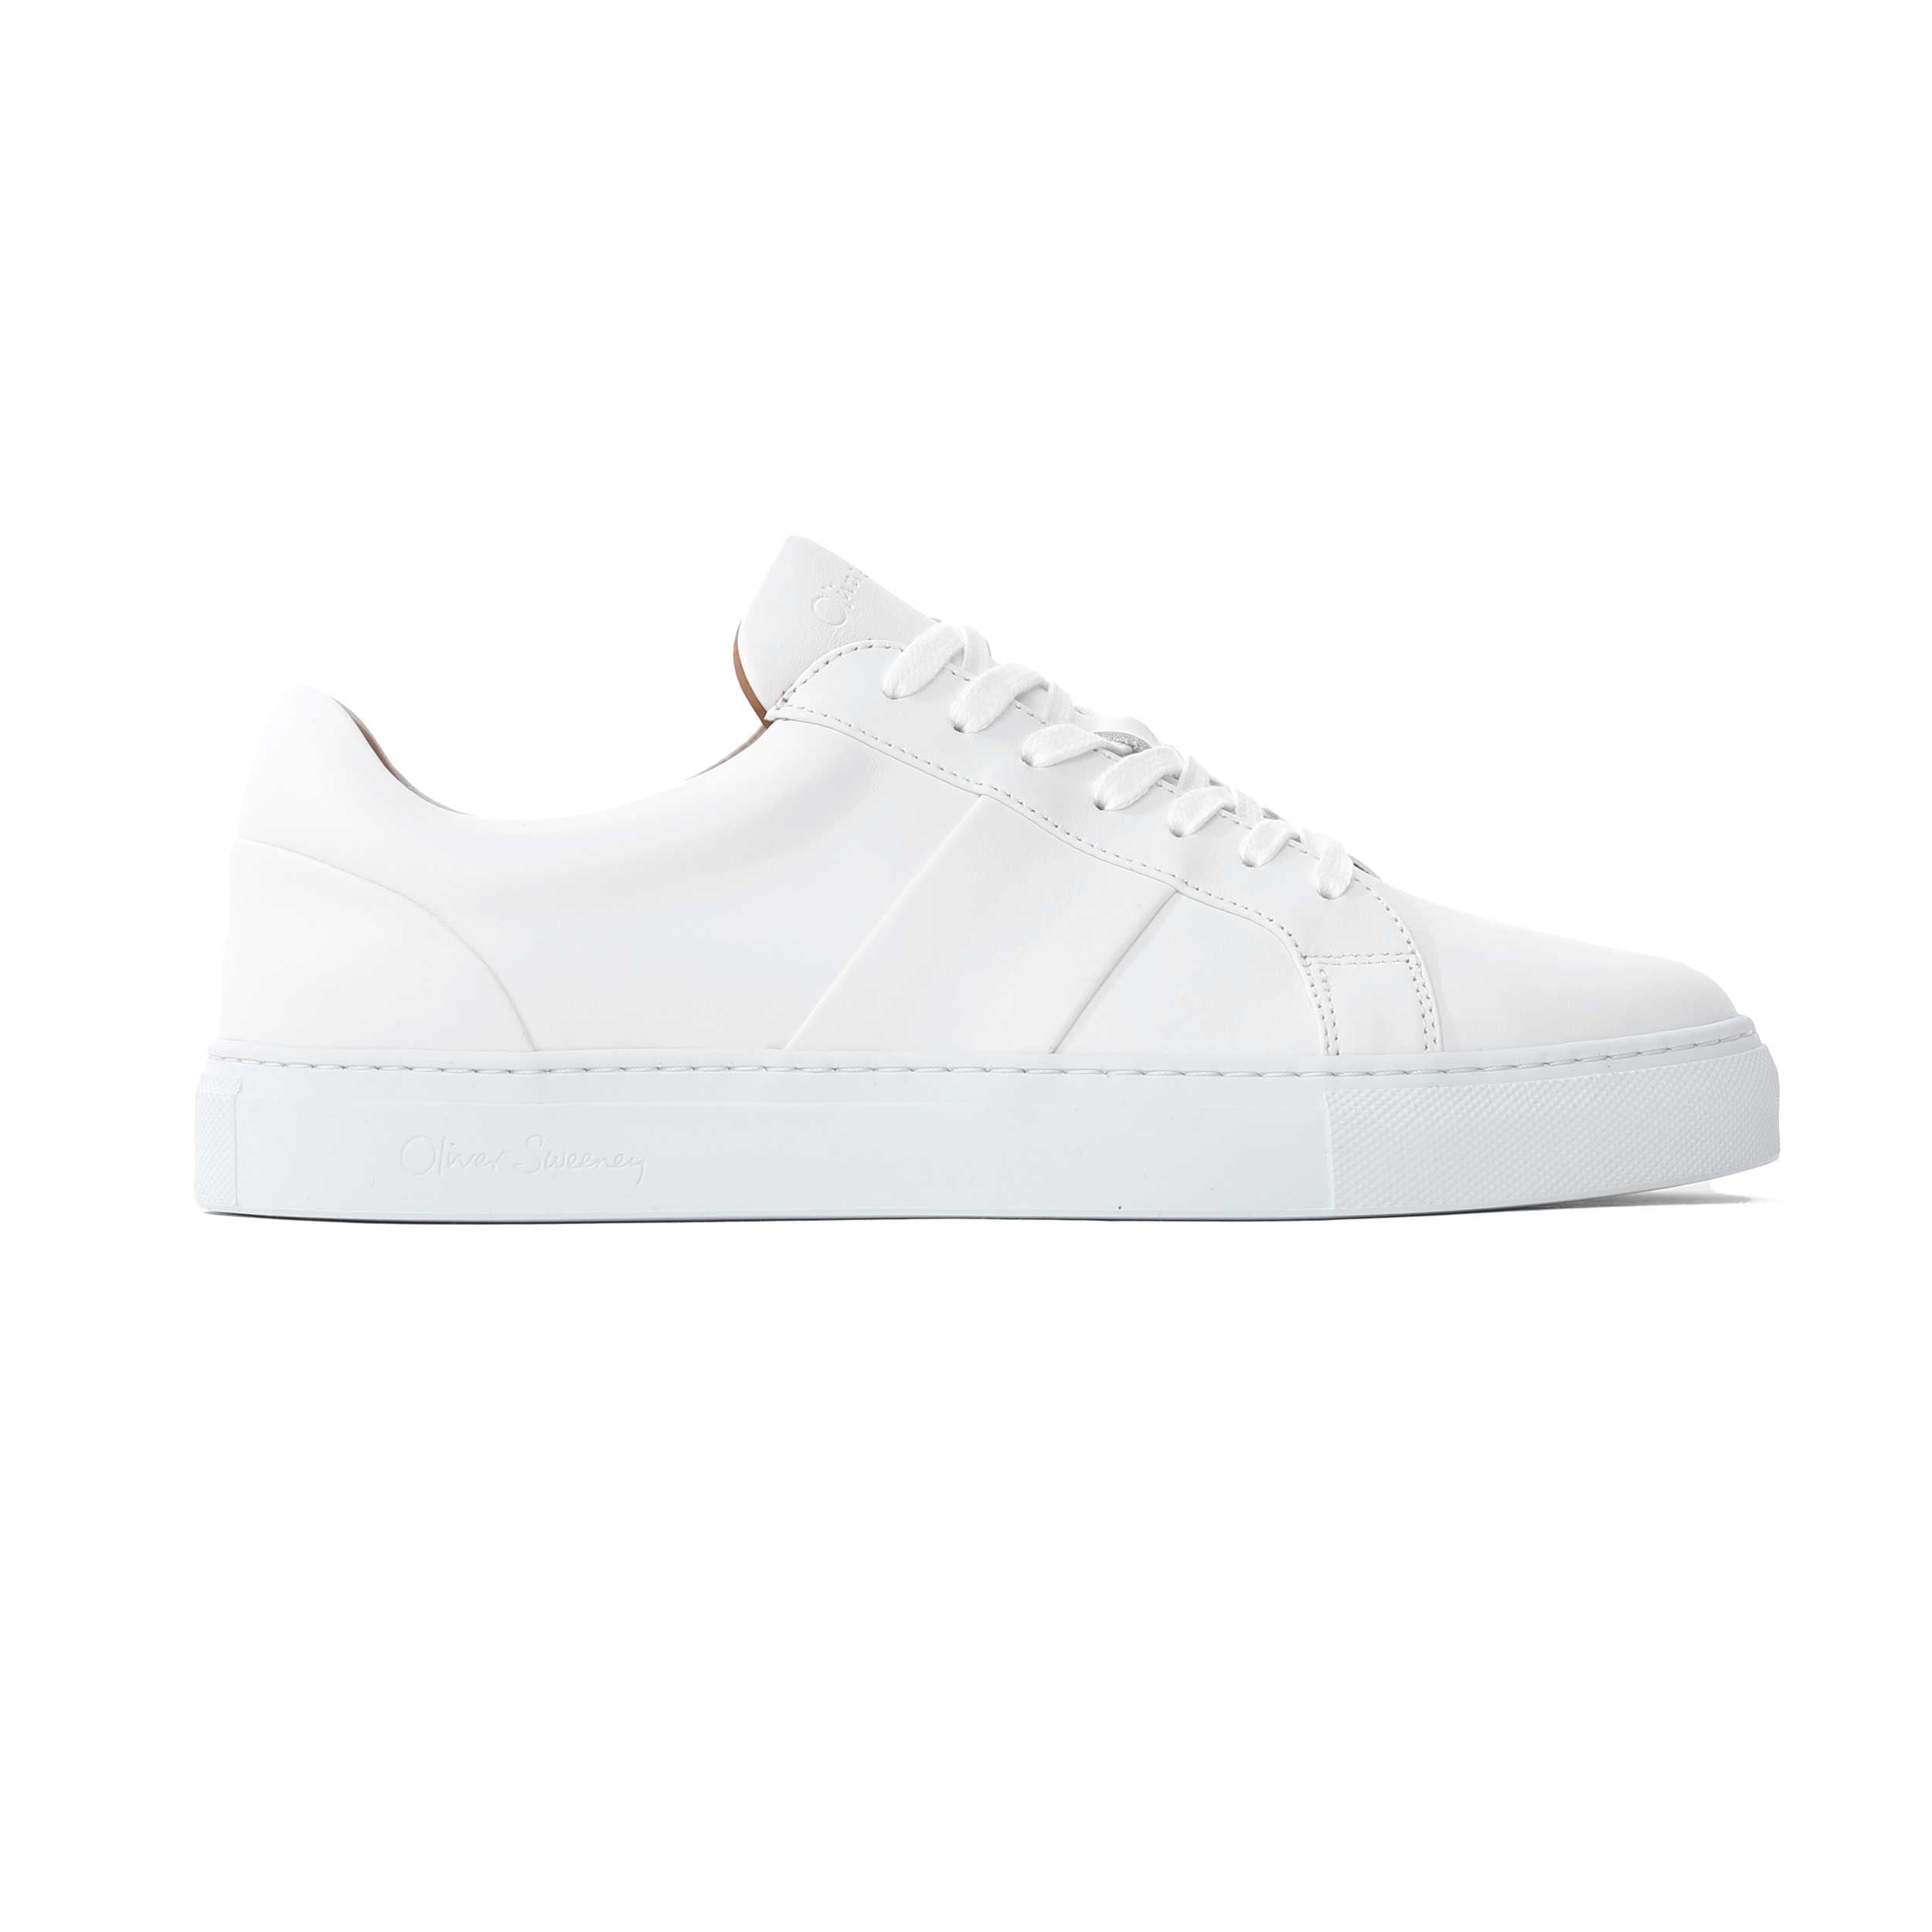 Oliver Sweeney Quintos Trainer in White | Oliver Sweeney | Norton Barrie